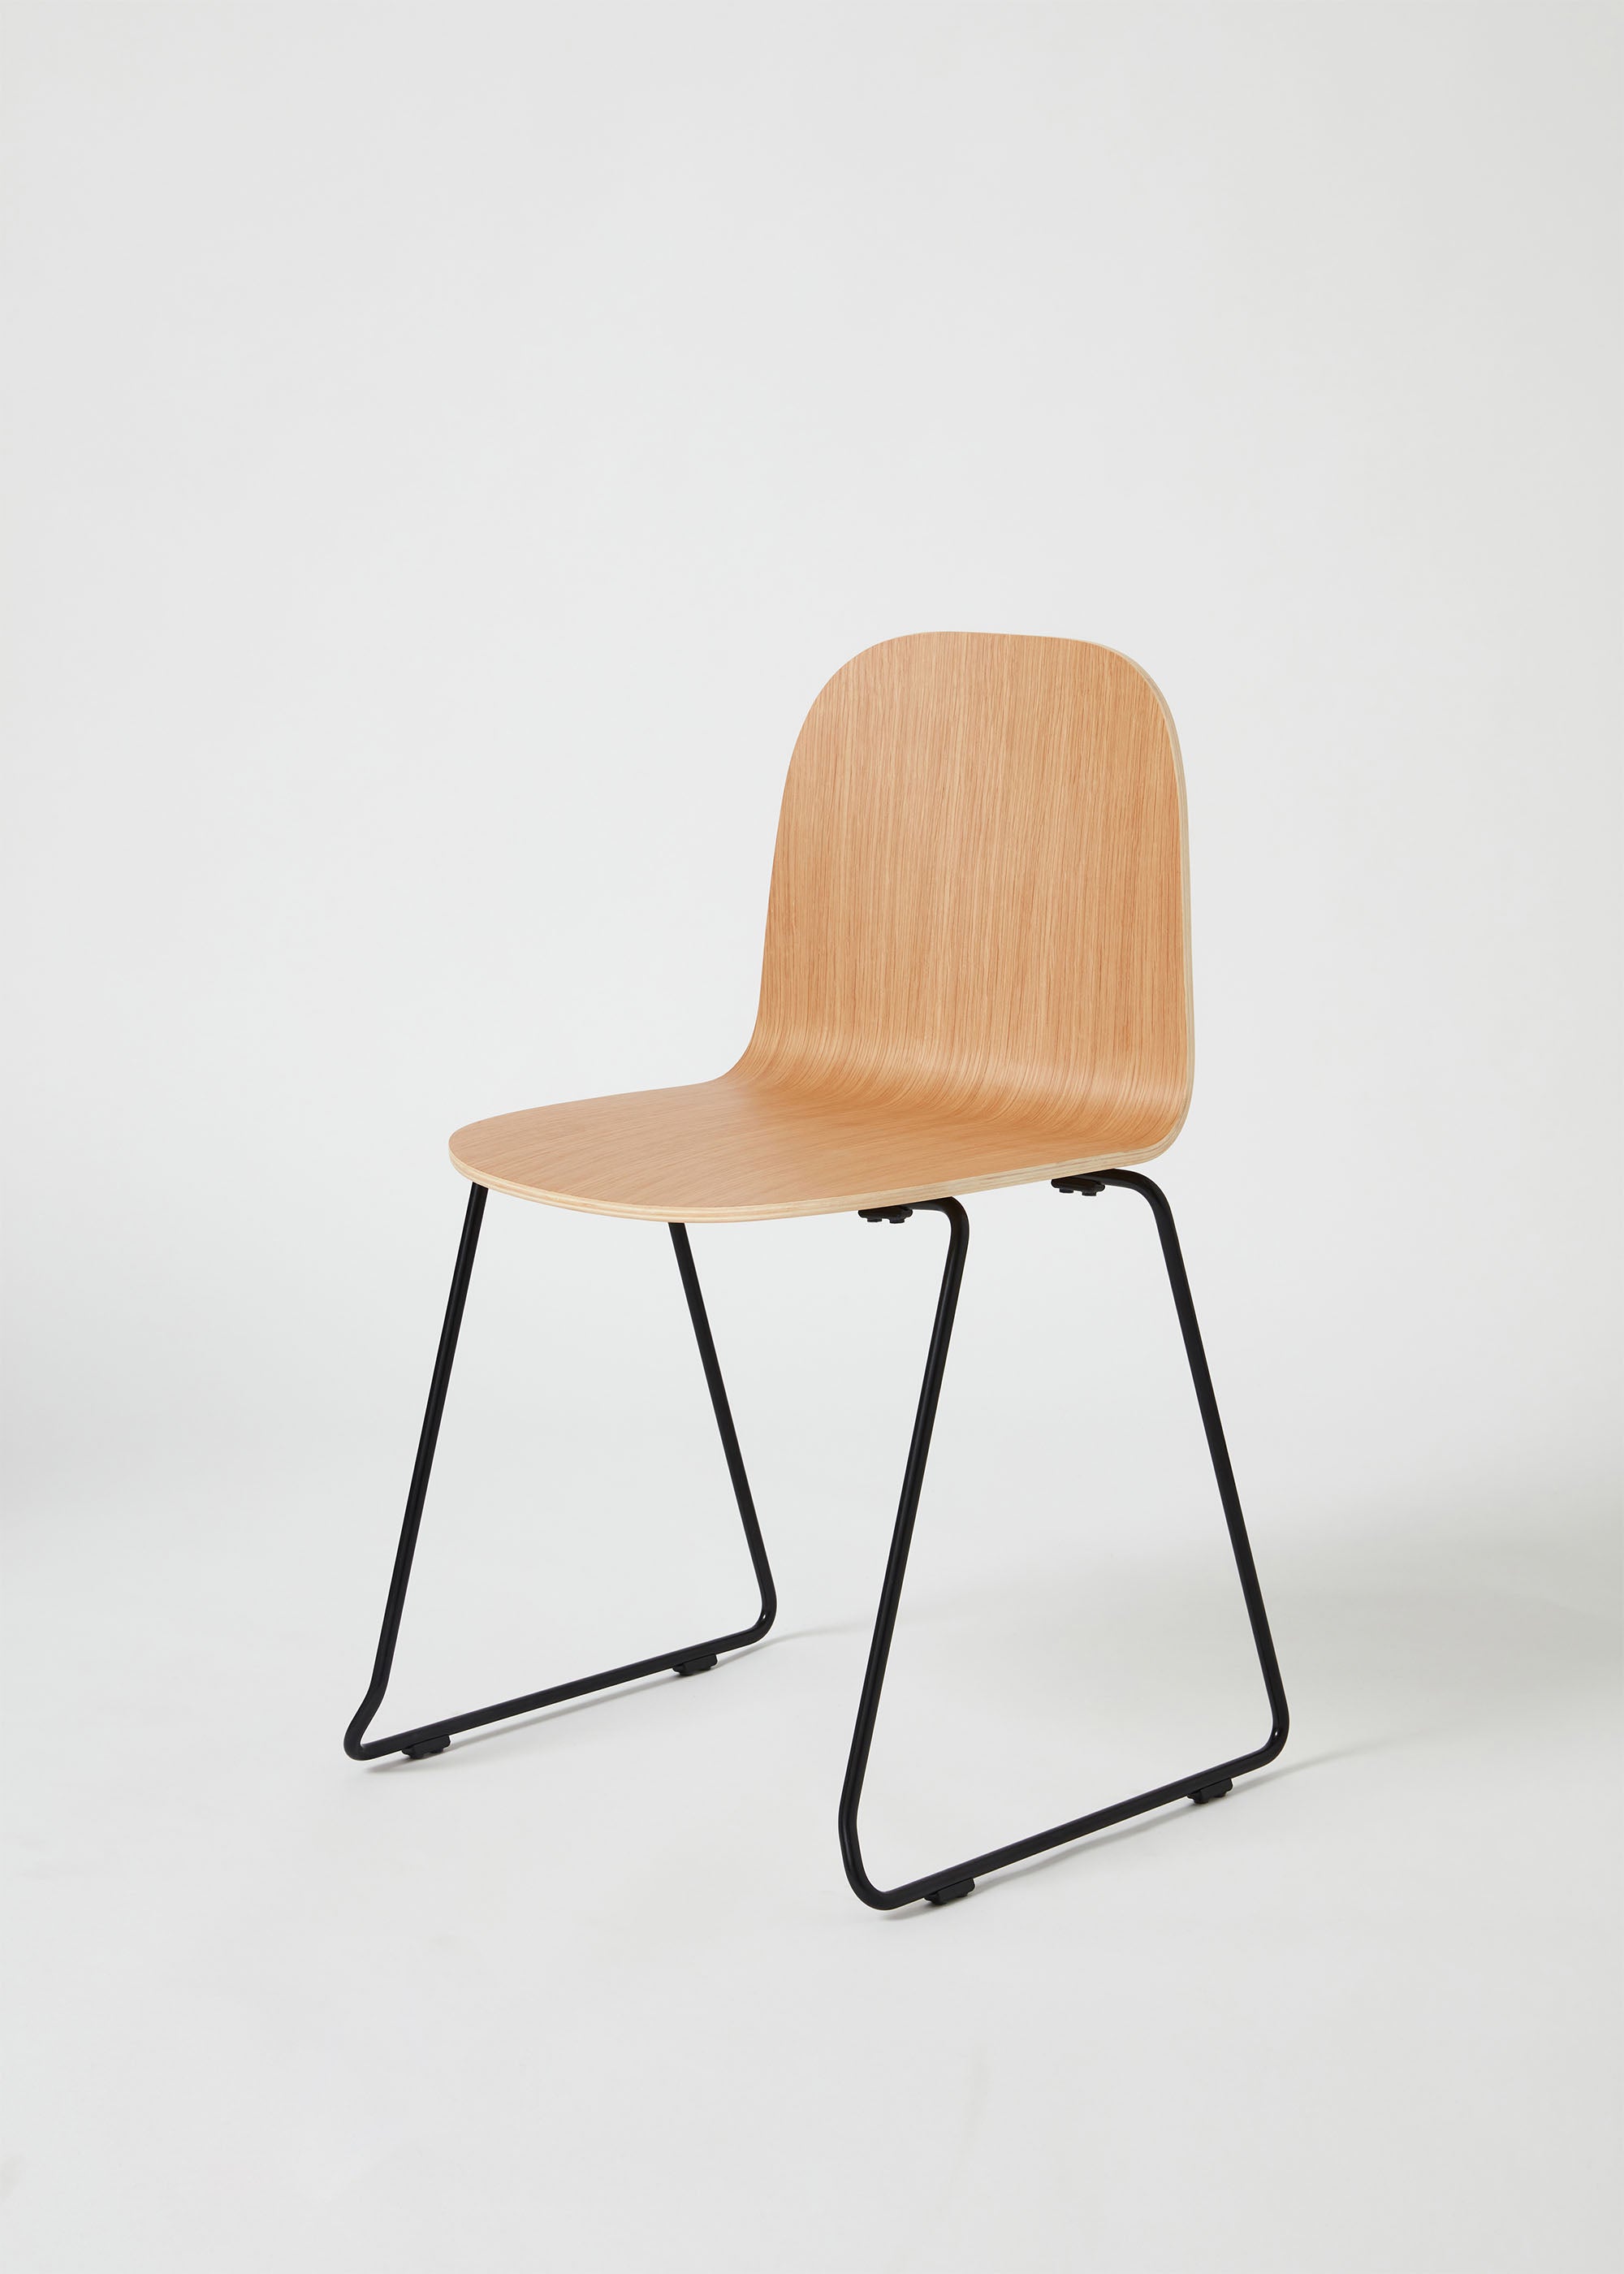 Potato Chair | Stacking Sled Timber & Upholstered Dining Office Chair with Handle | GibsonKarlo | DesignByThem 